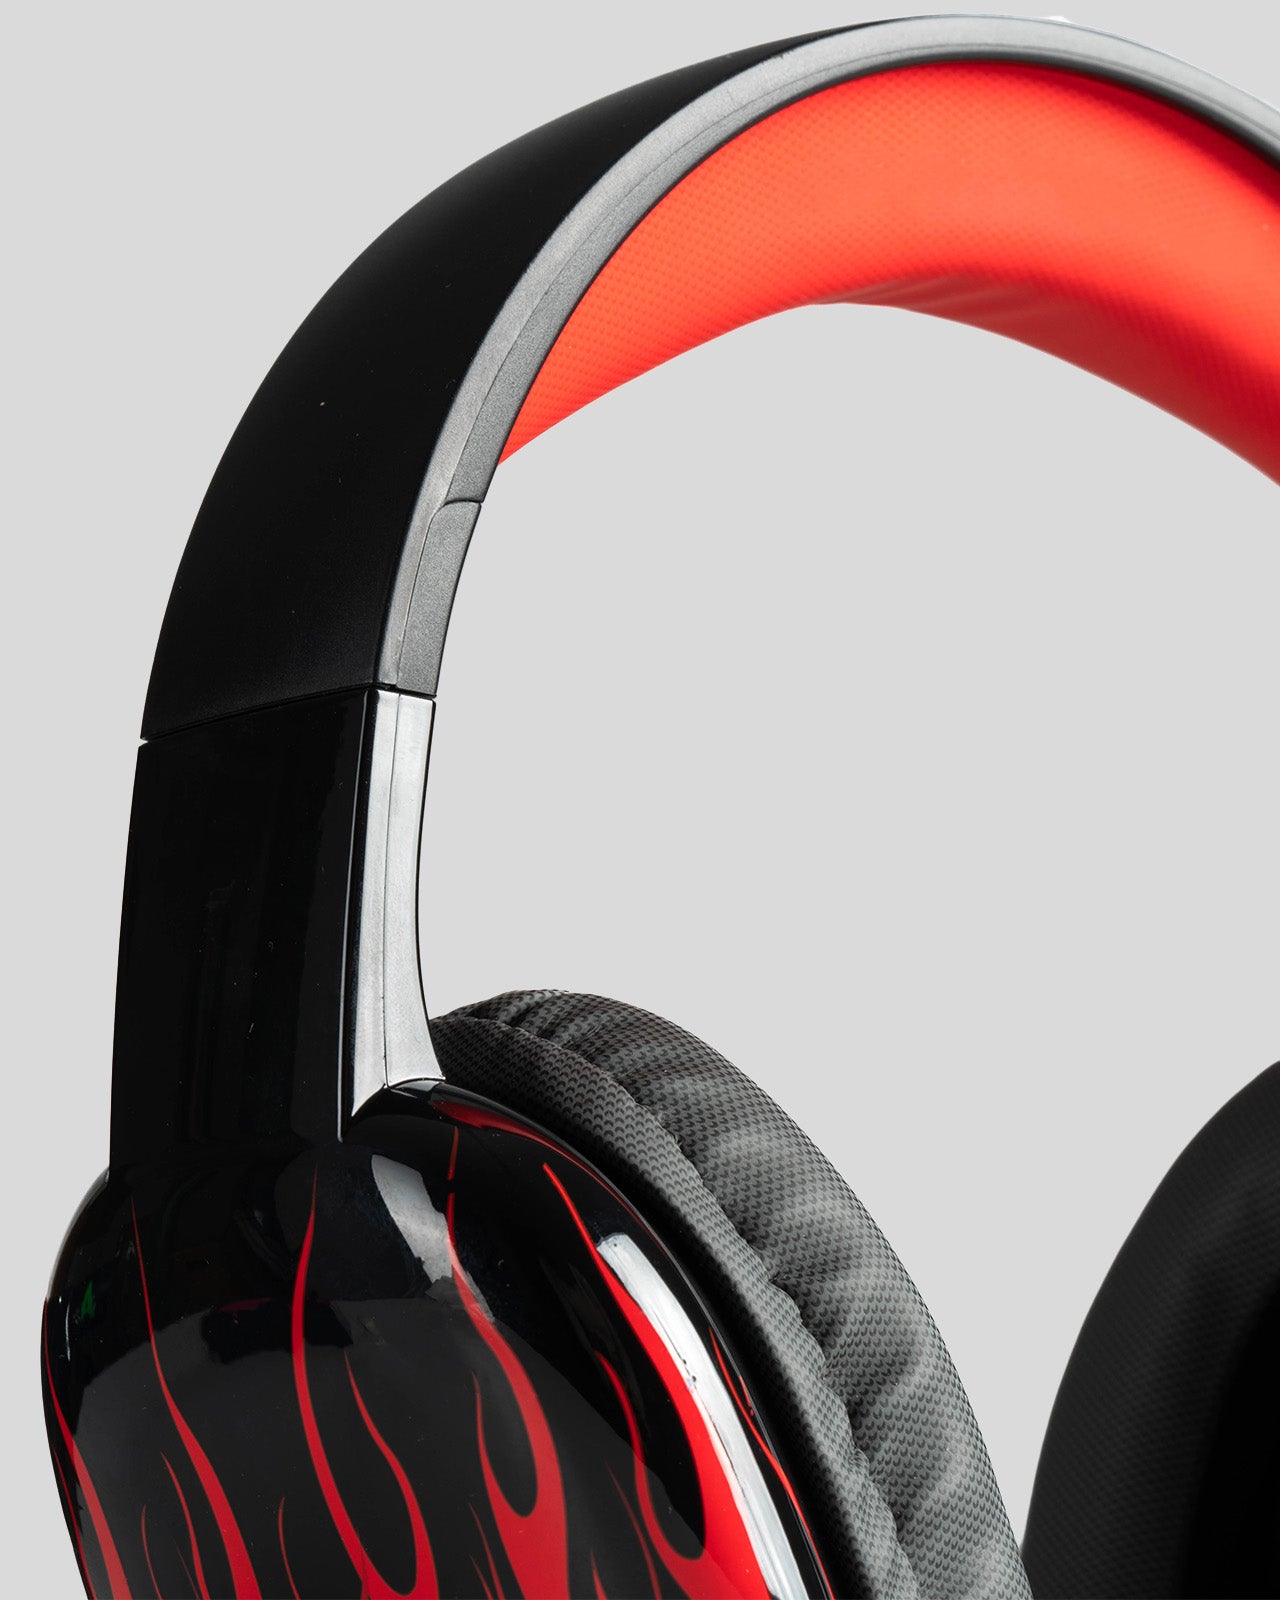 BLACK HEADPHONES WITH RED FLAMES AND WHITE LOGO